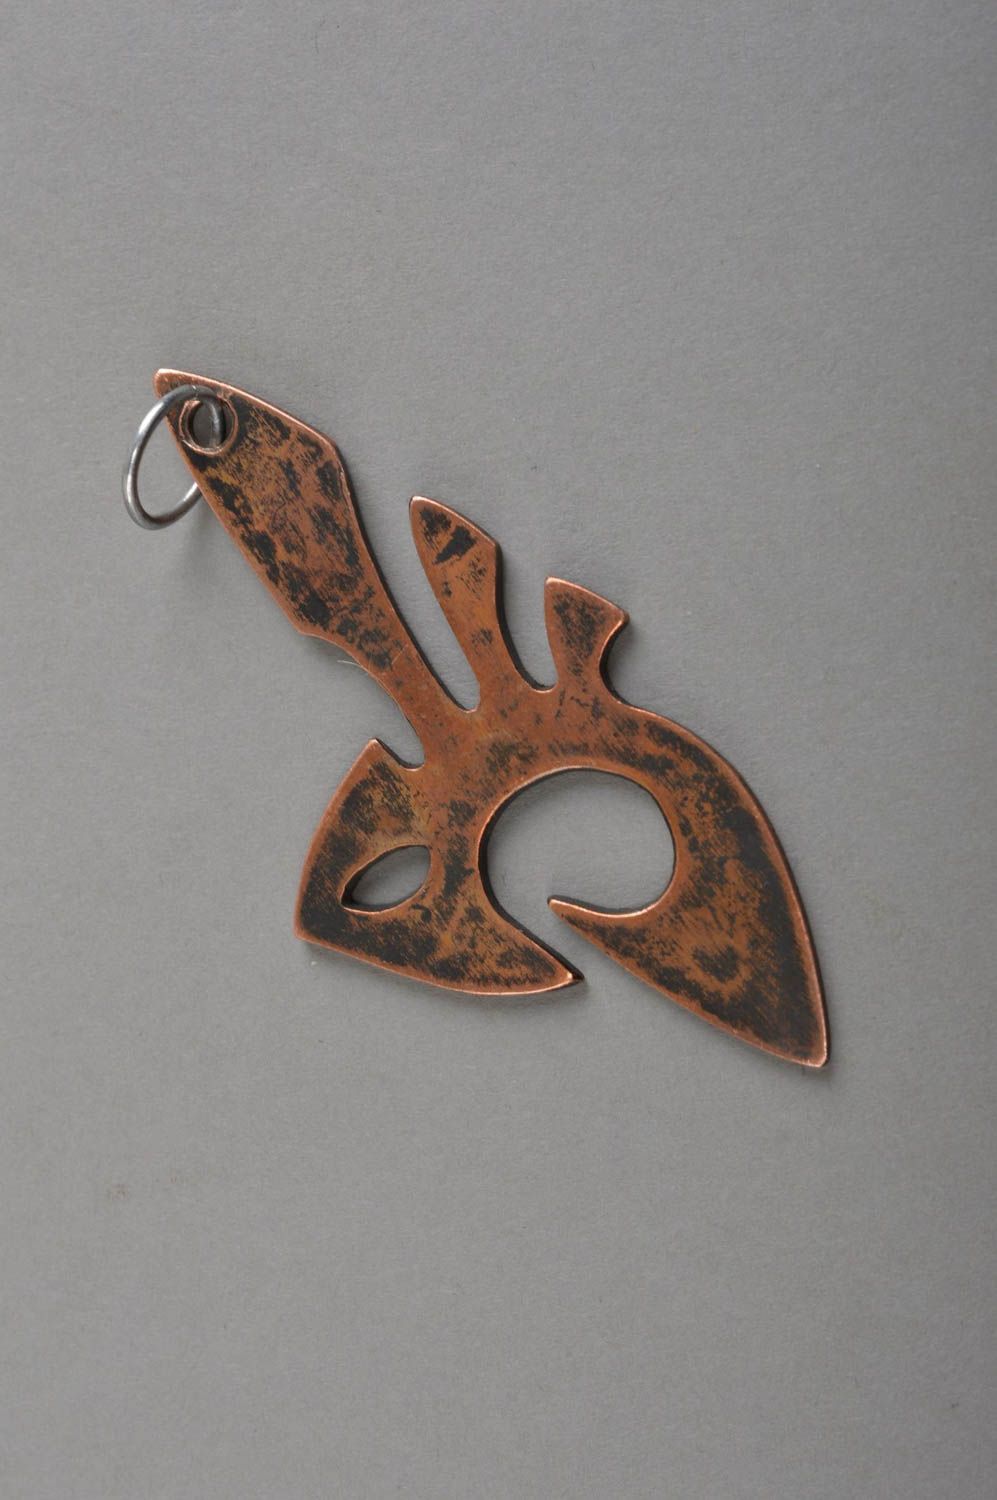 Handmade pendant in shape of fish made of copper on lace stylish accessory  photo 4